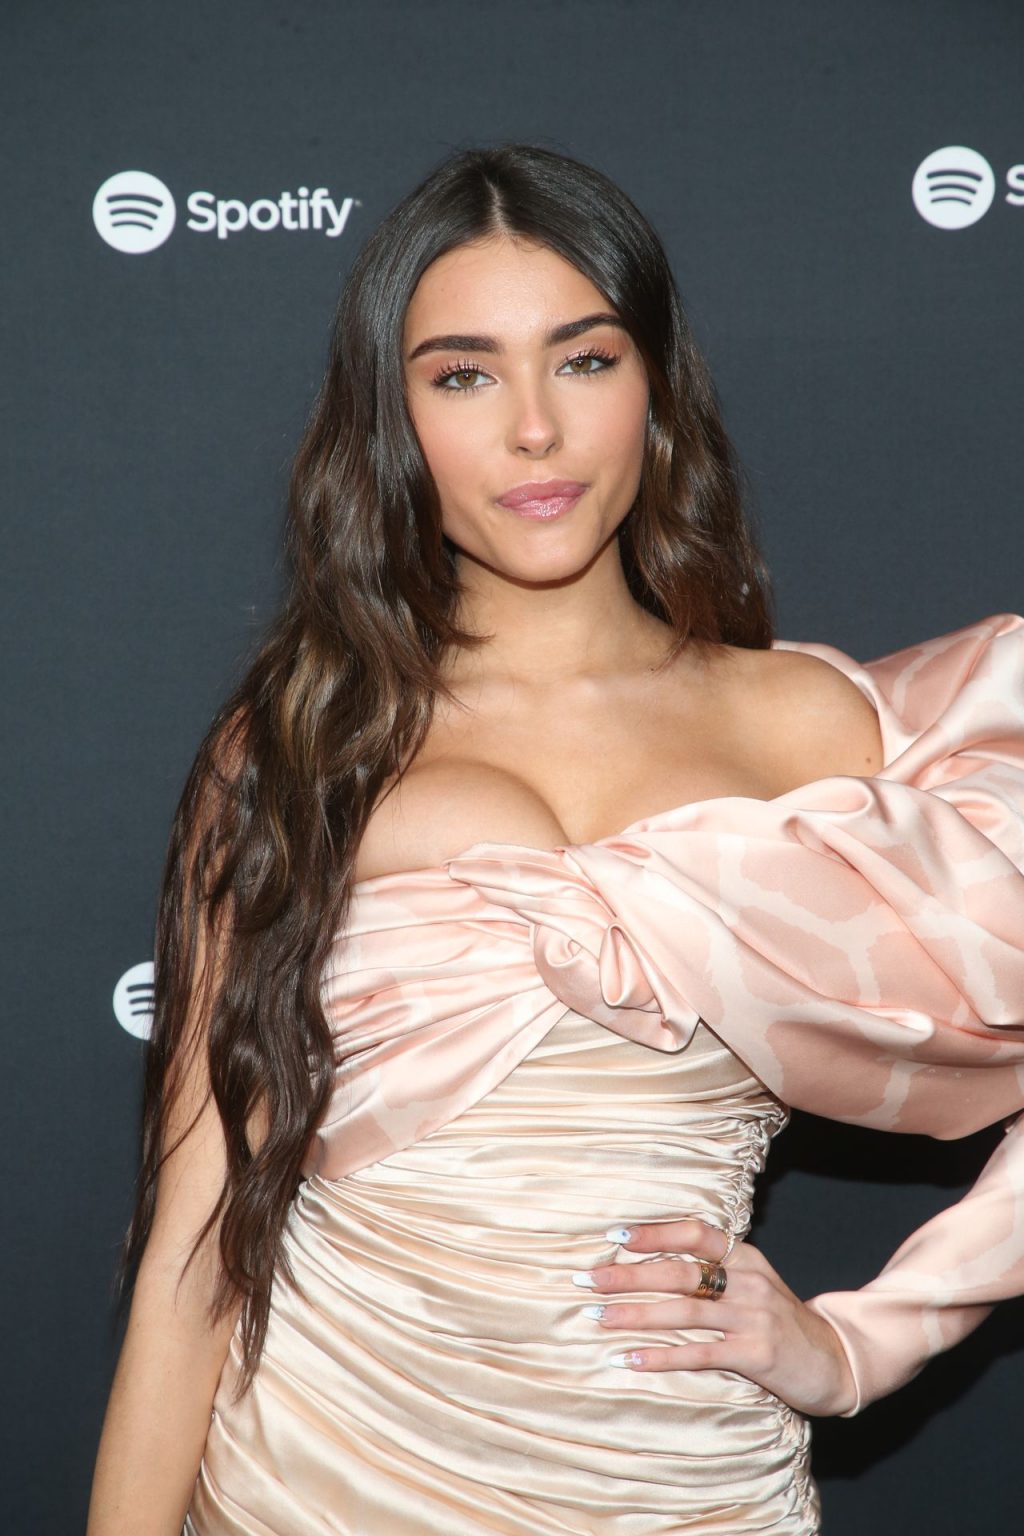 Madison Beer Displays Her Boobs at the Spotify Best New Artist Party (65 Photos)